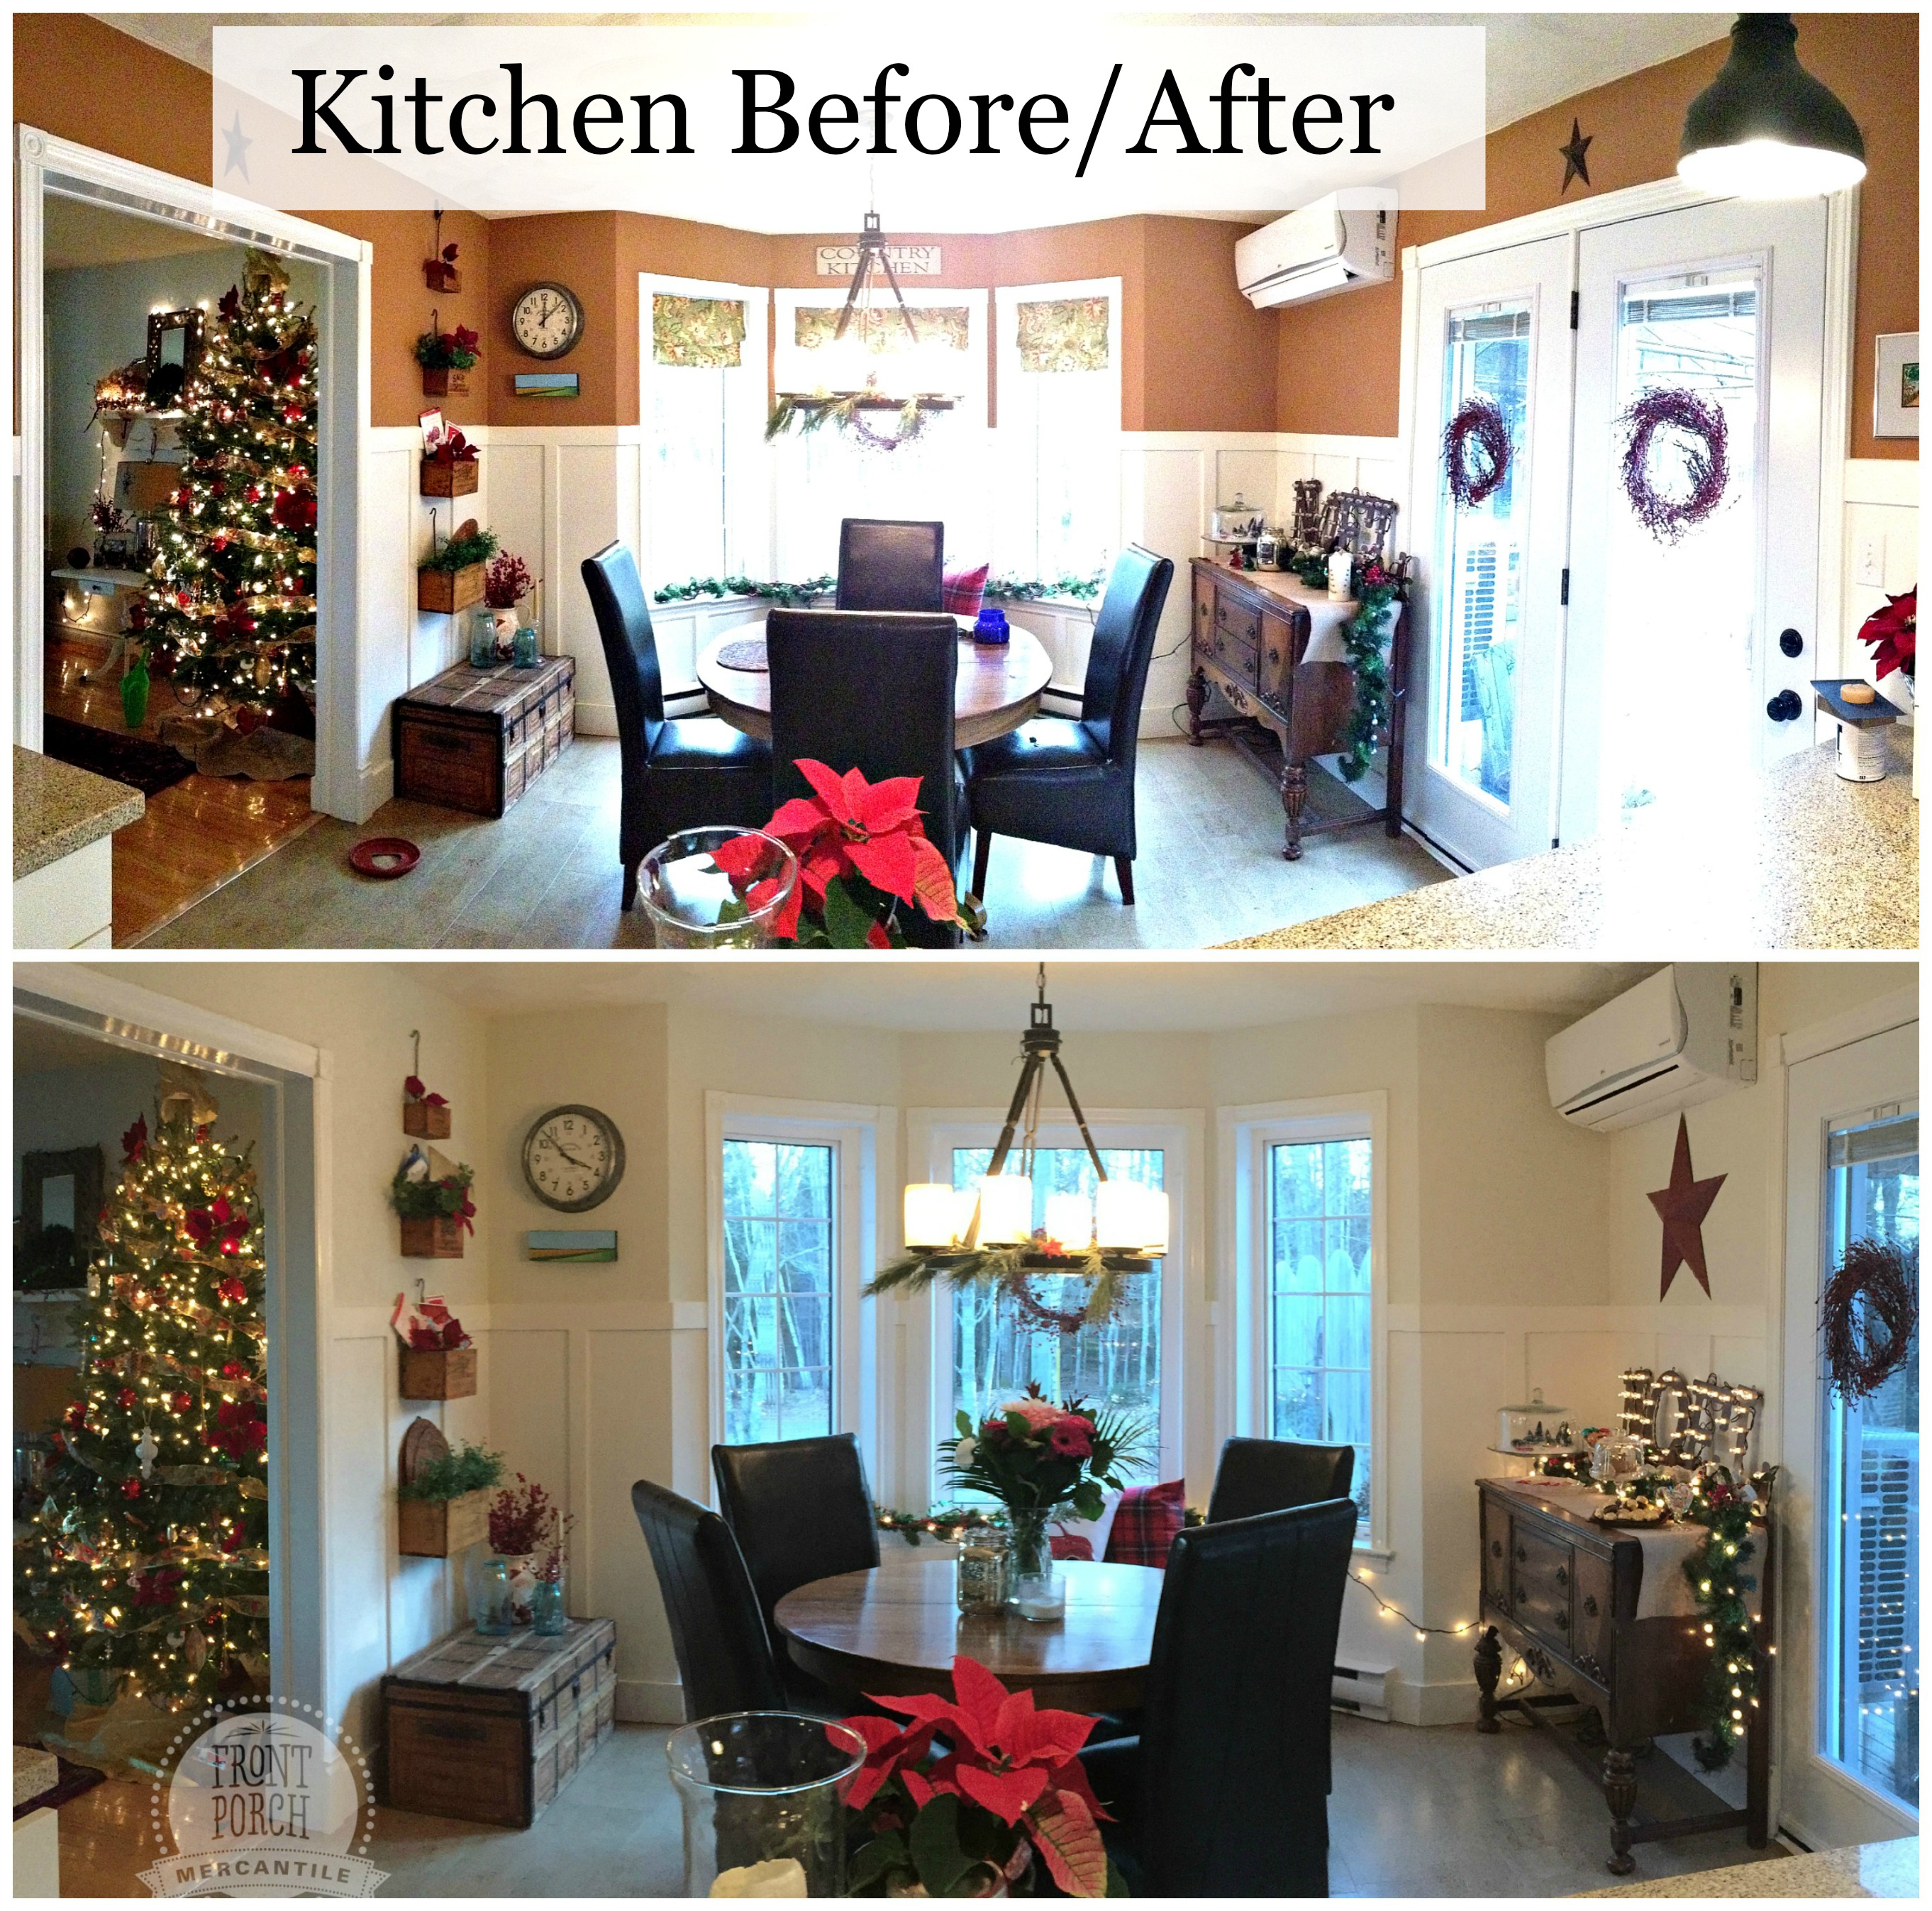 Before/After Kitchen refresh Front Porch Mercantile